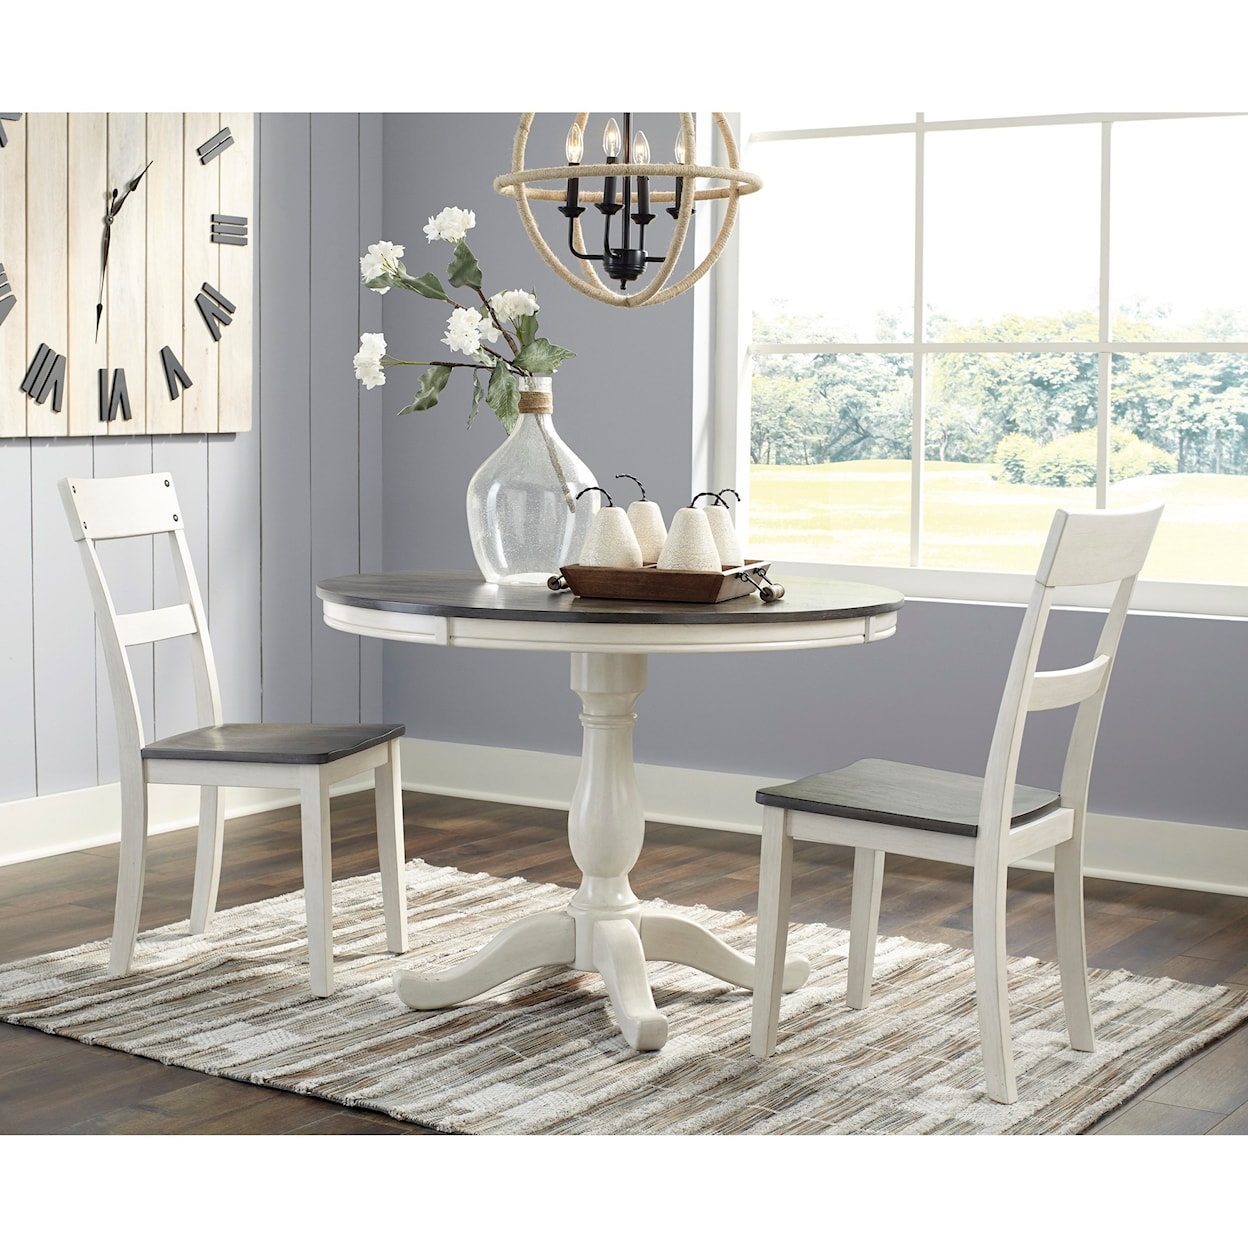 Signature Design by Ashley Furniture Nelling Dining Room Table